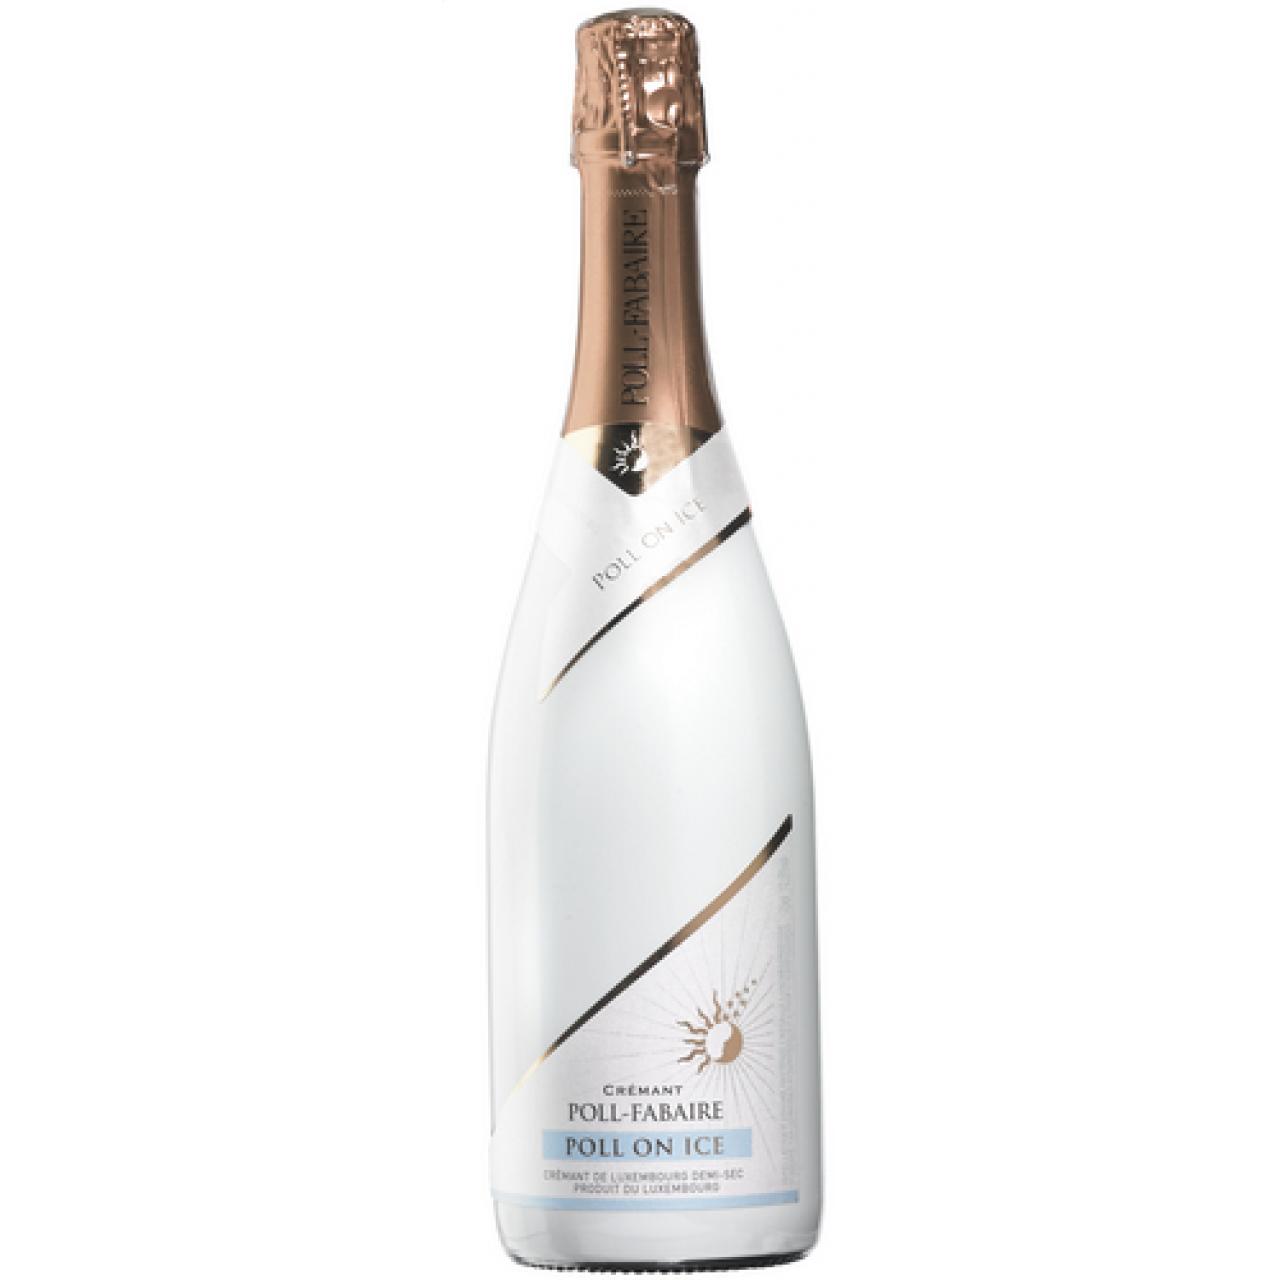 CREMANT LUX. POLL-FABAIRE ON ICE 75CL